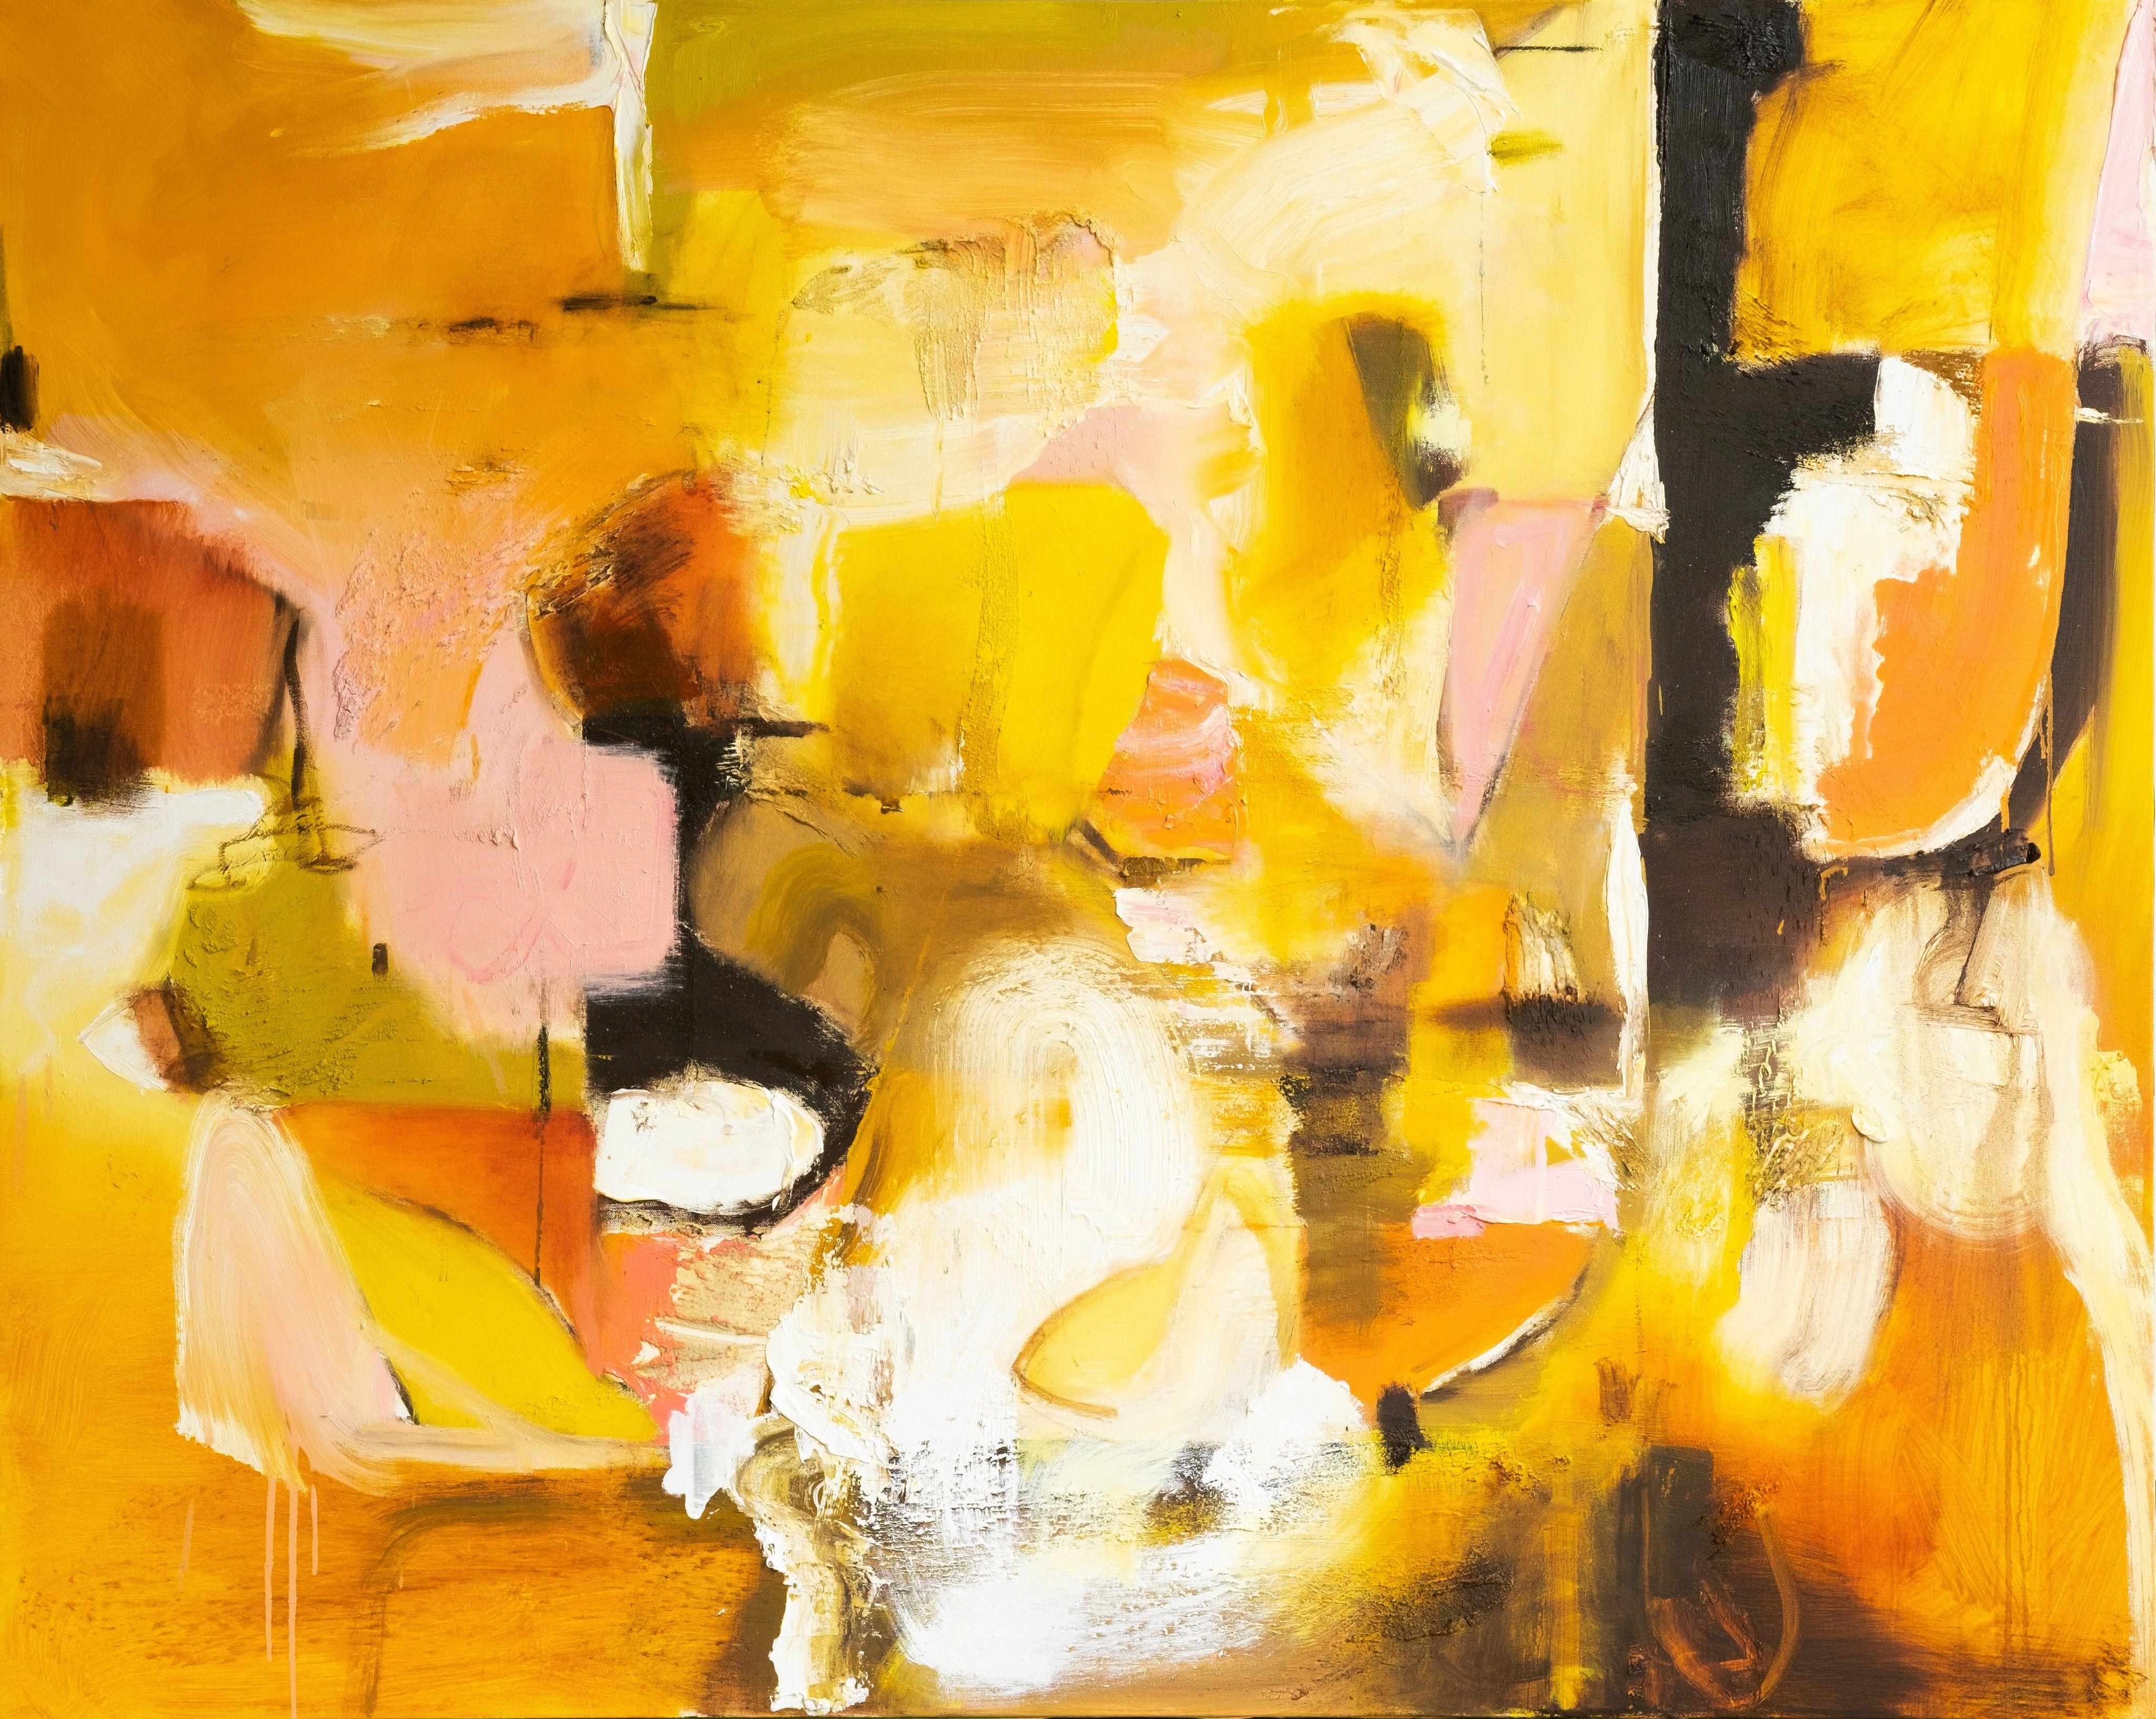 This is a big, juicy oil painting! With warm colors of oranges, yellows, and white. There are plenty of unique, interesting shapes and textures layering one upon another. This offers the painting a sculptural quality. The painting is contemporary